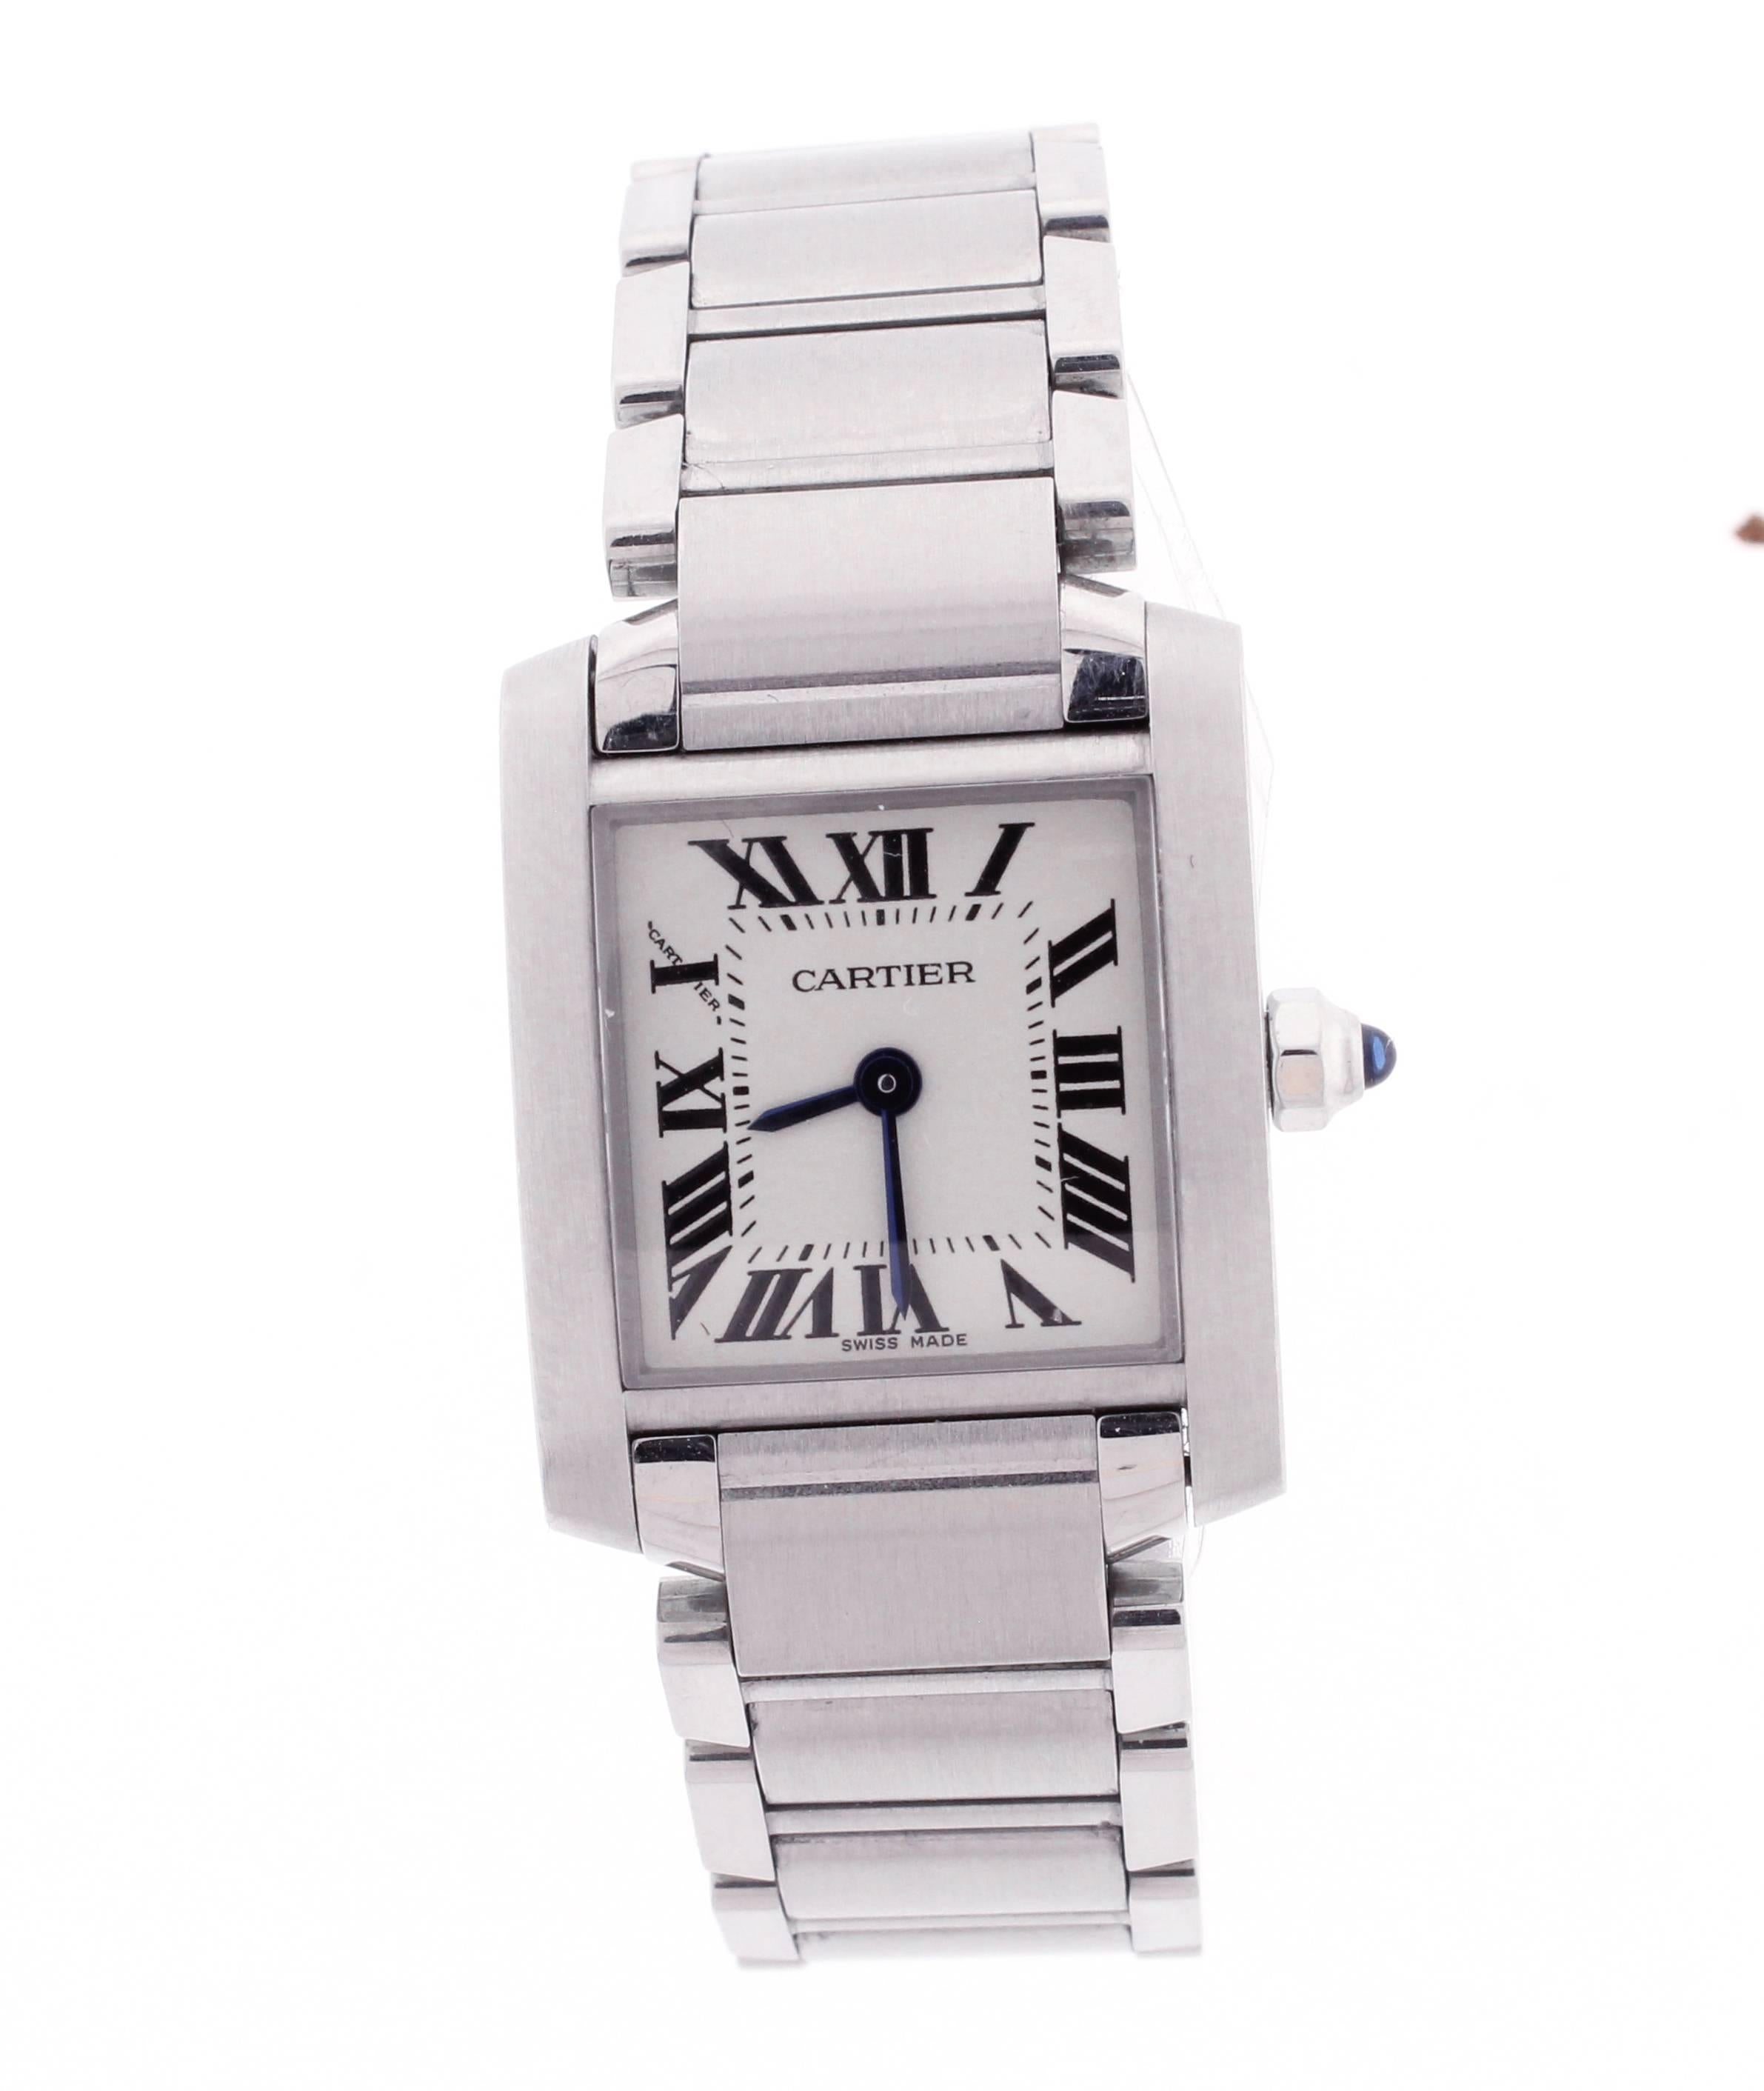 Ladies' stainless steel 25x20mm Cartier Tank Française watch with Swiss made quartz movement, smooth bezel, white dial, black Roman numerals, blued steel sword hands, stainless steel link bracelet with satin finish and deployant closure.
•	Model